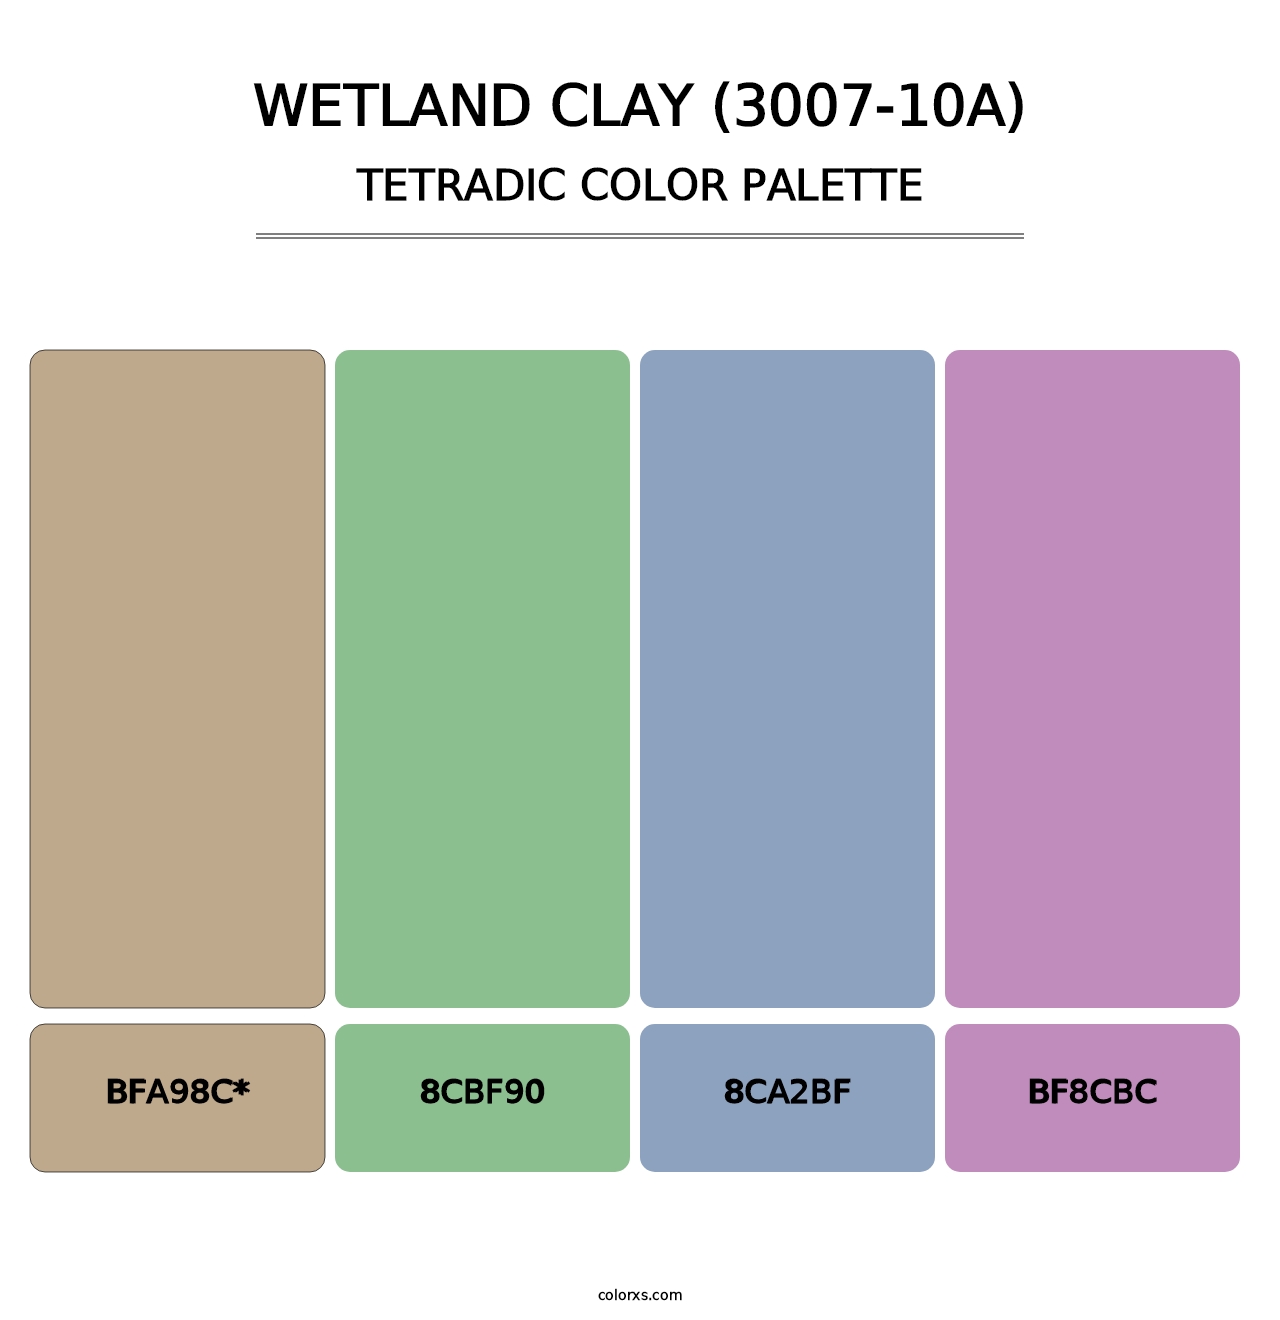 Wetland Clay (3007-10A) - Tetradic Color Palette